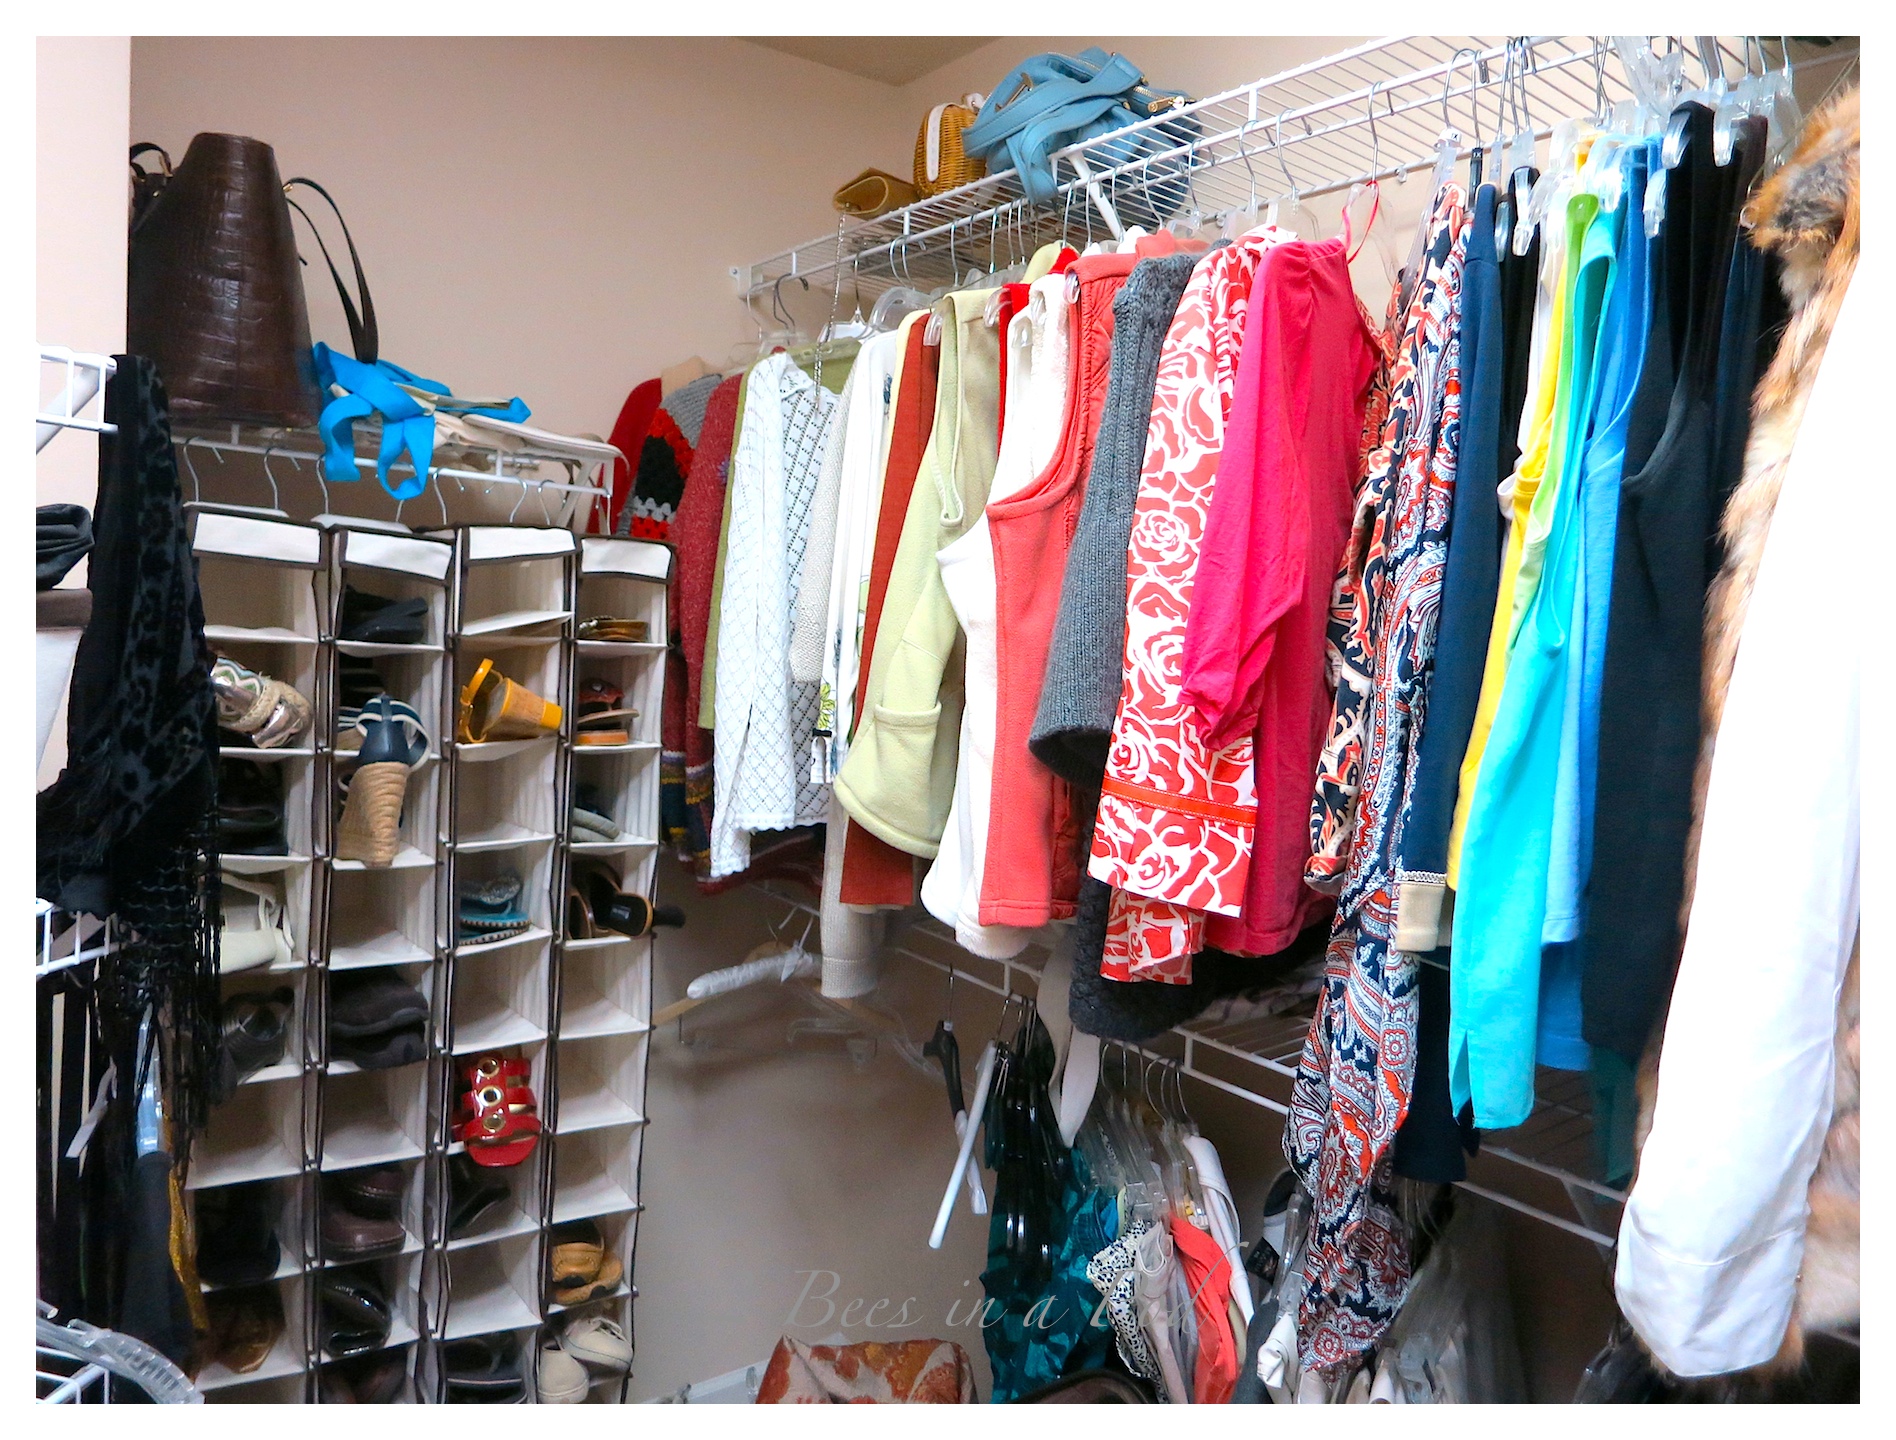 Master bedroom closet makeover. See how this disorganized and messy closet was completely transformed with custom shelving, crown moulding and storage.